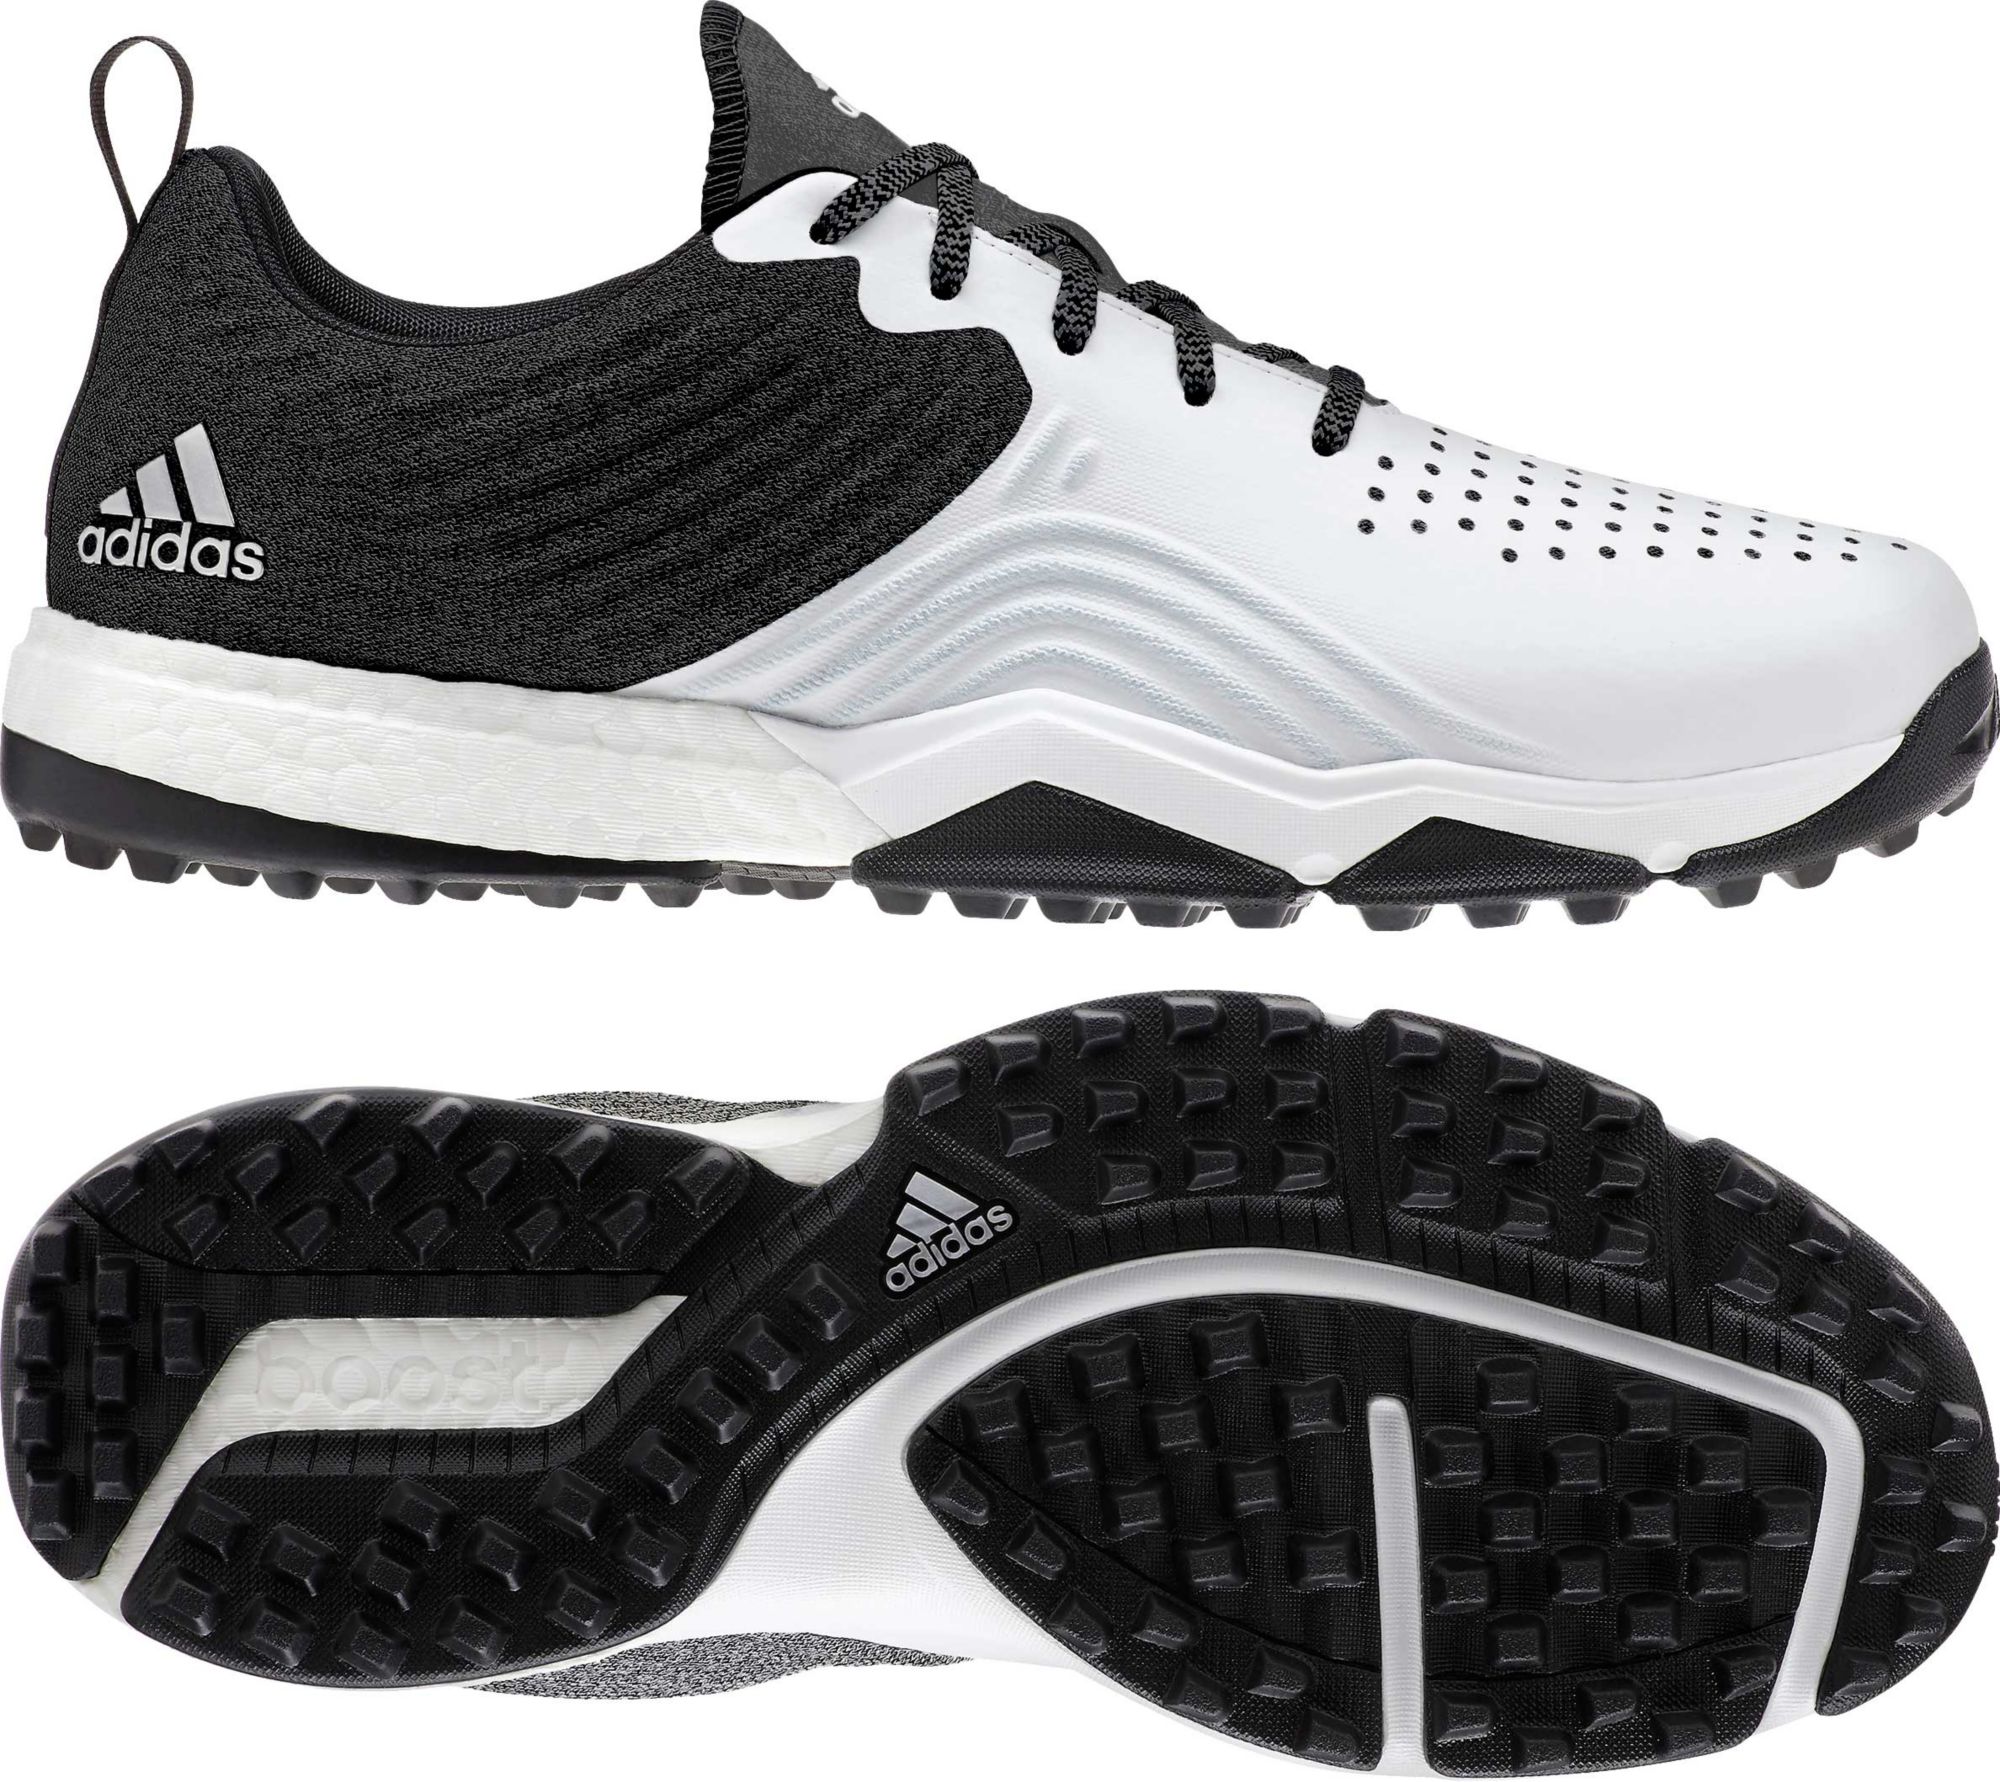 adidas adipower 4orged boost mens golf shoes